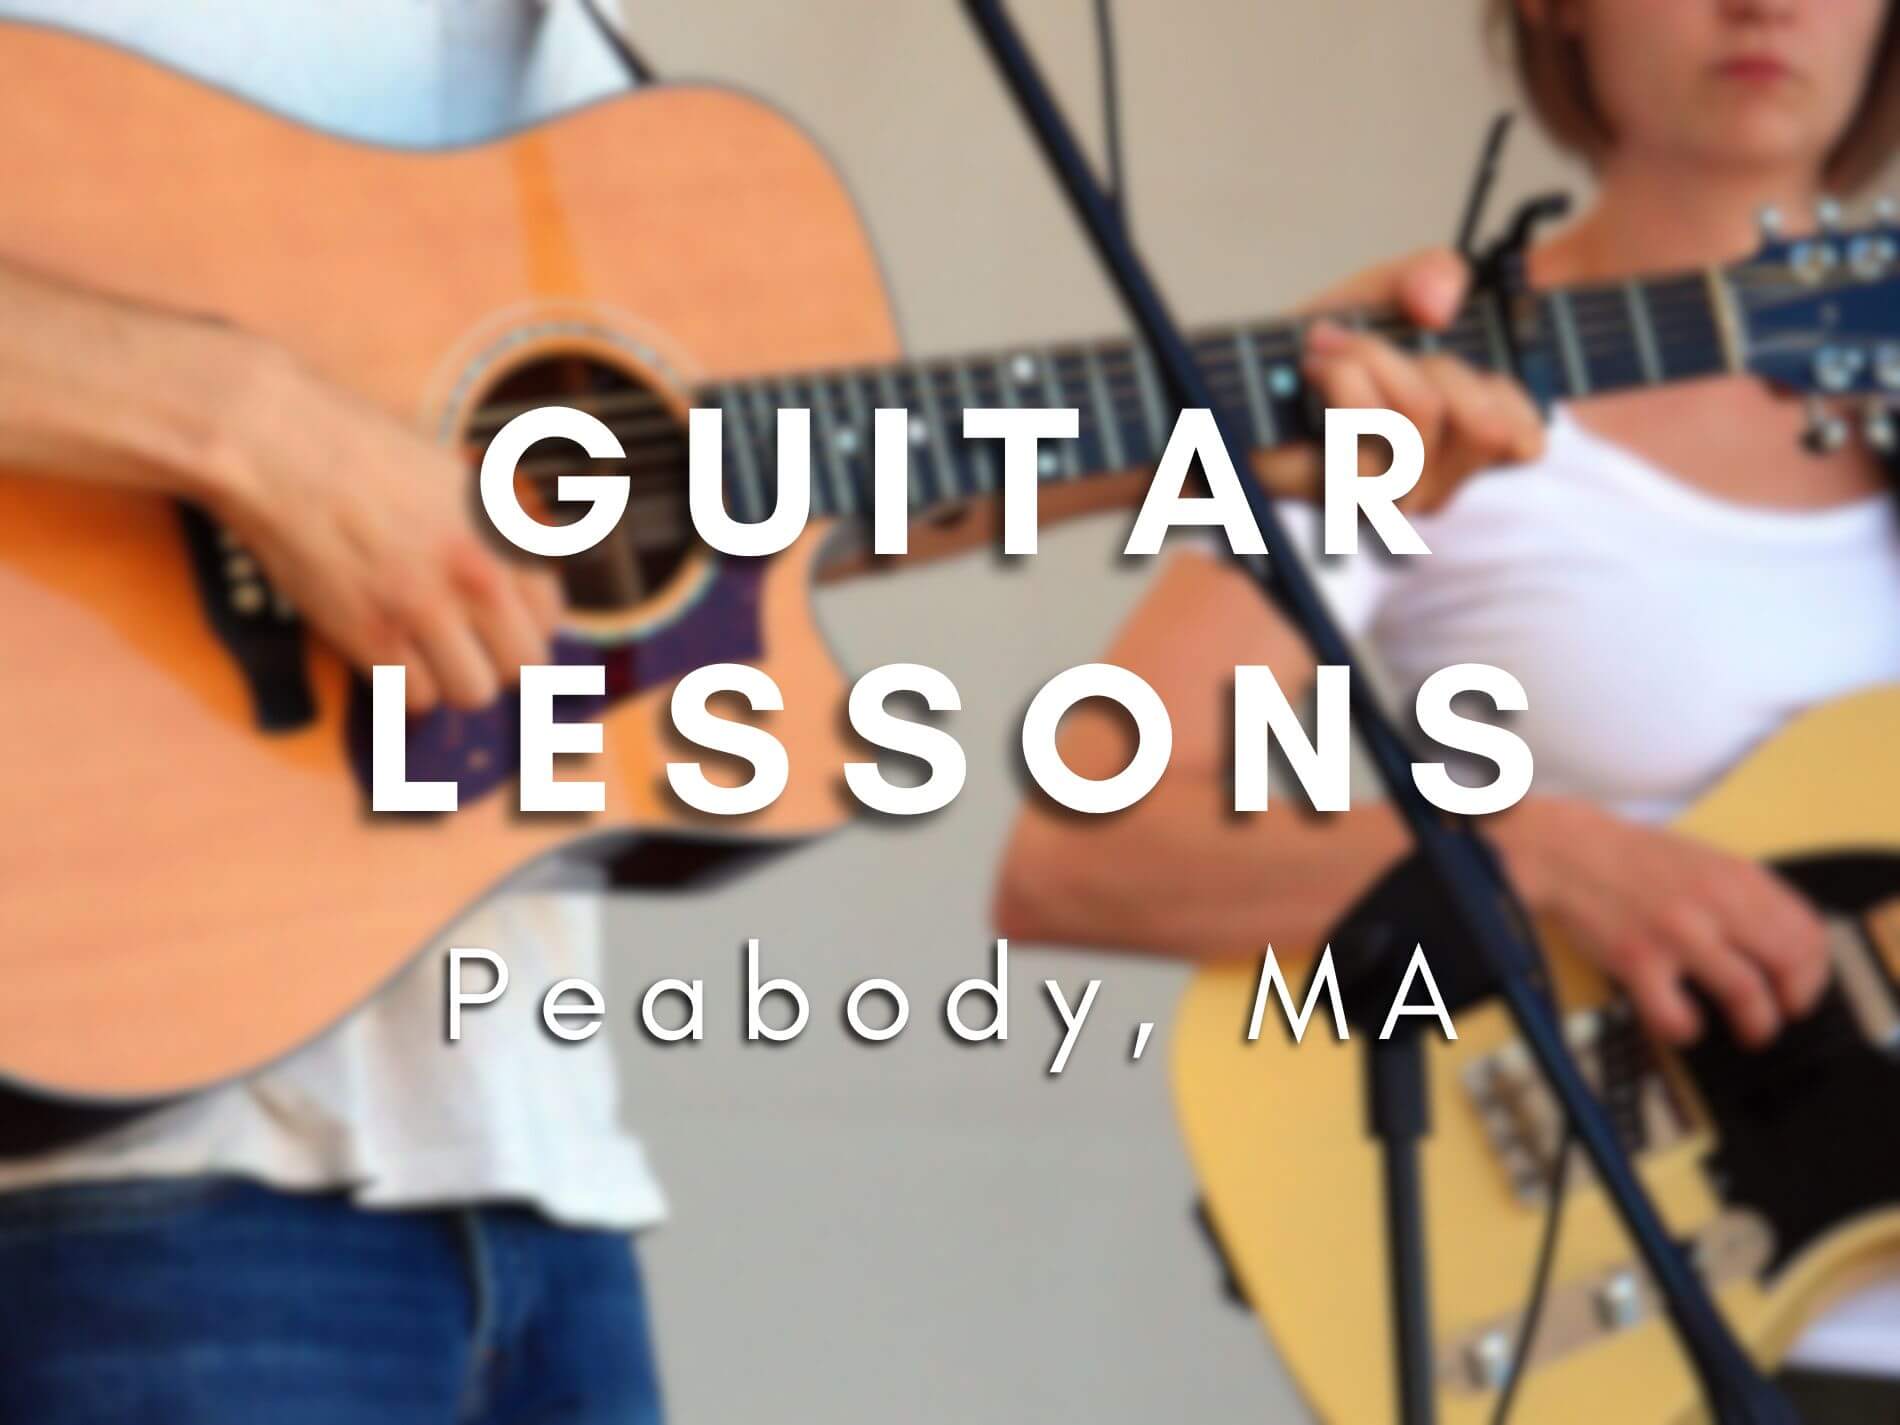 Guitar Lessons in Peabody, Massachusetts: Learn to Play Guitar with Expert Instruction